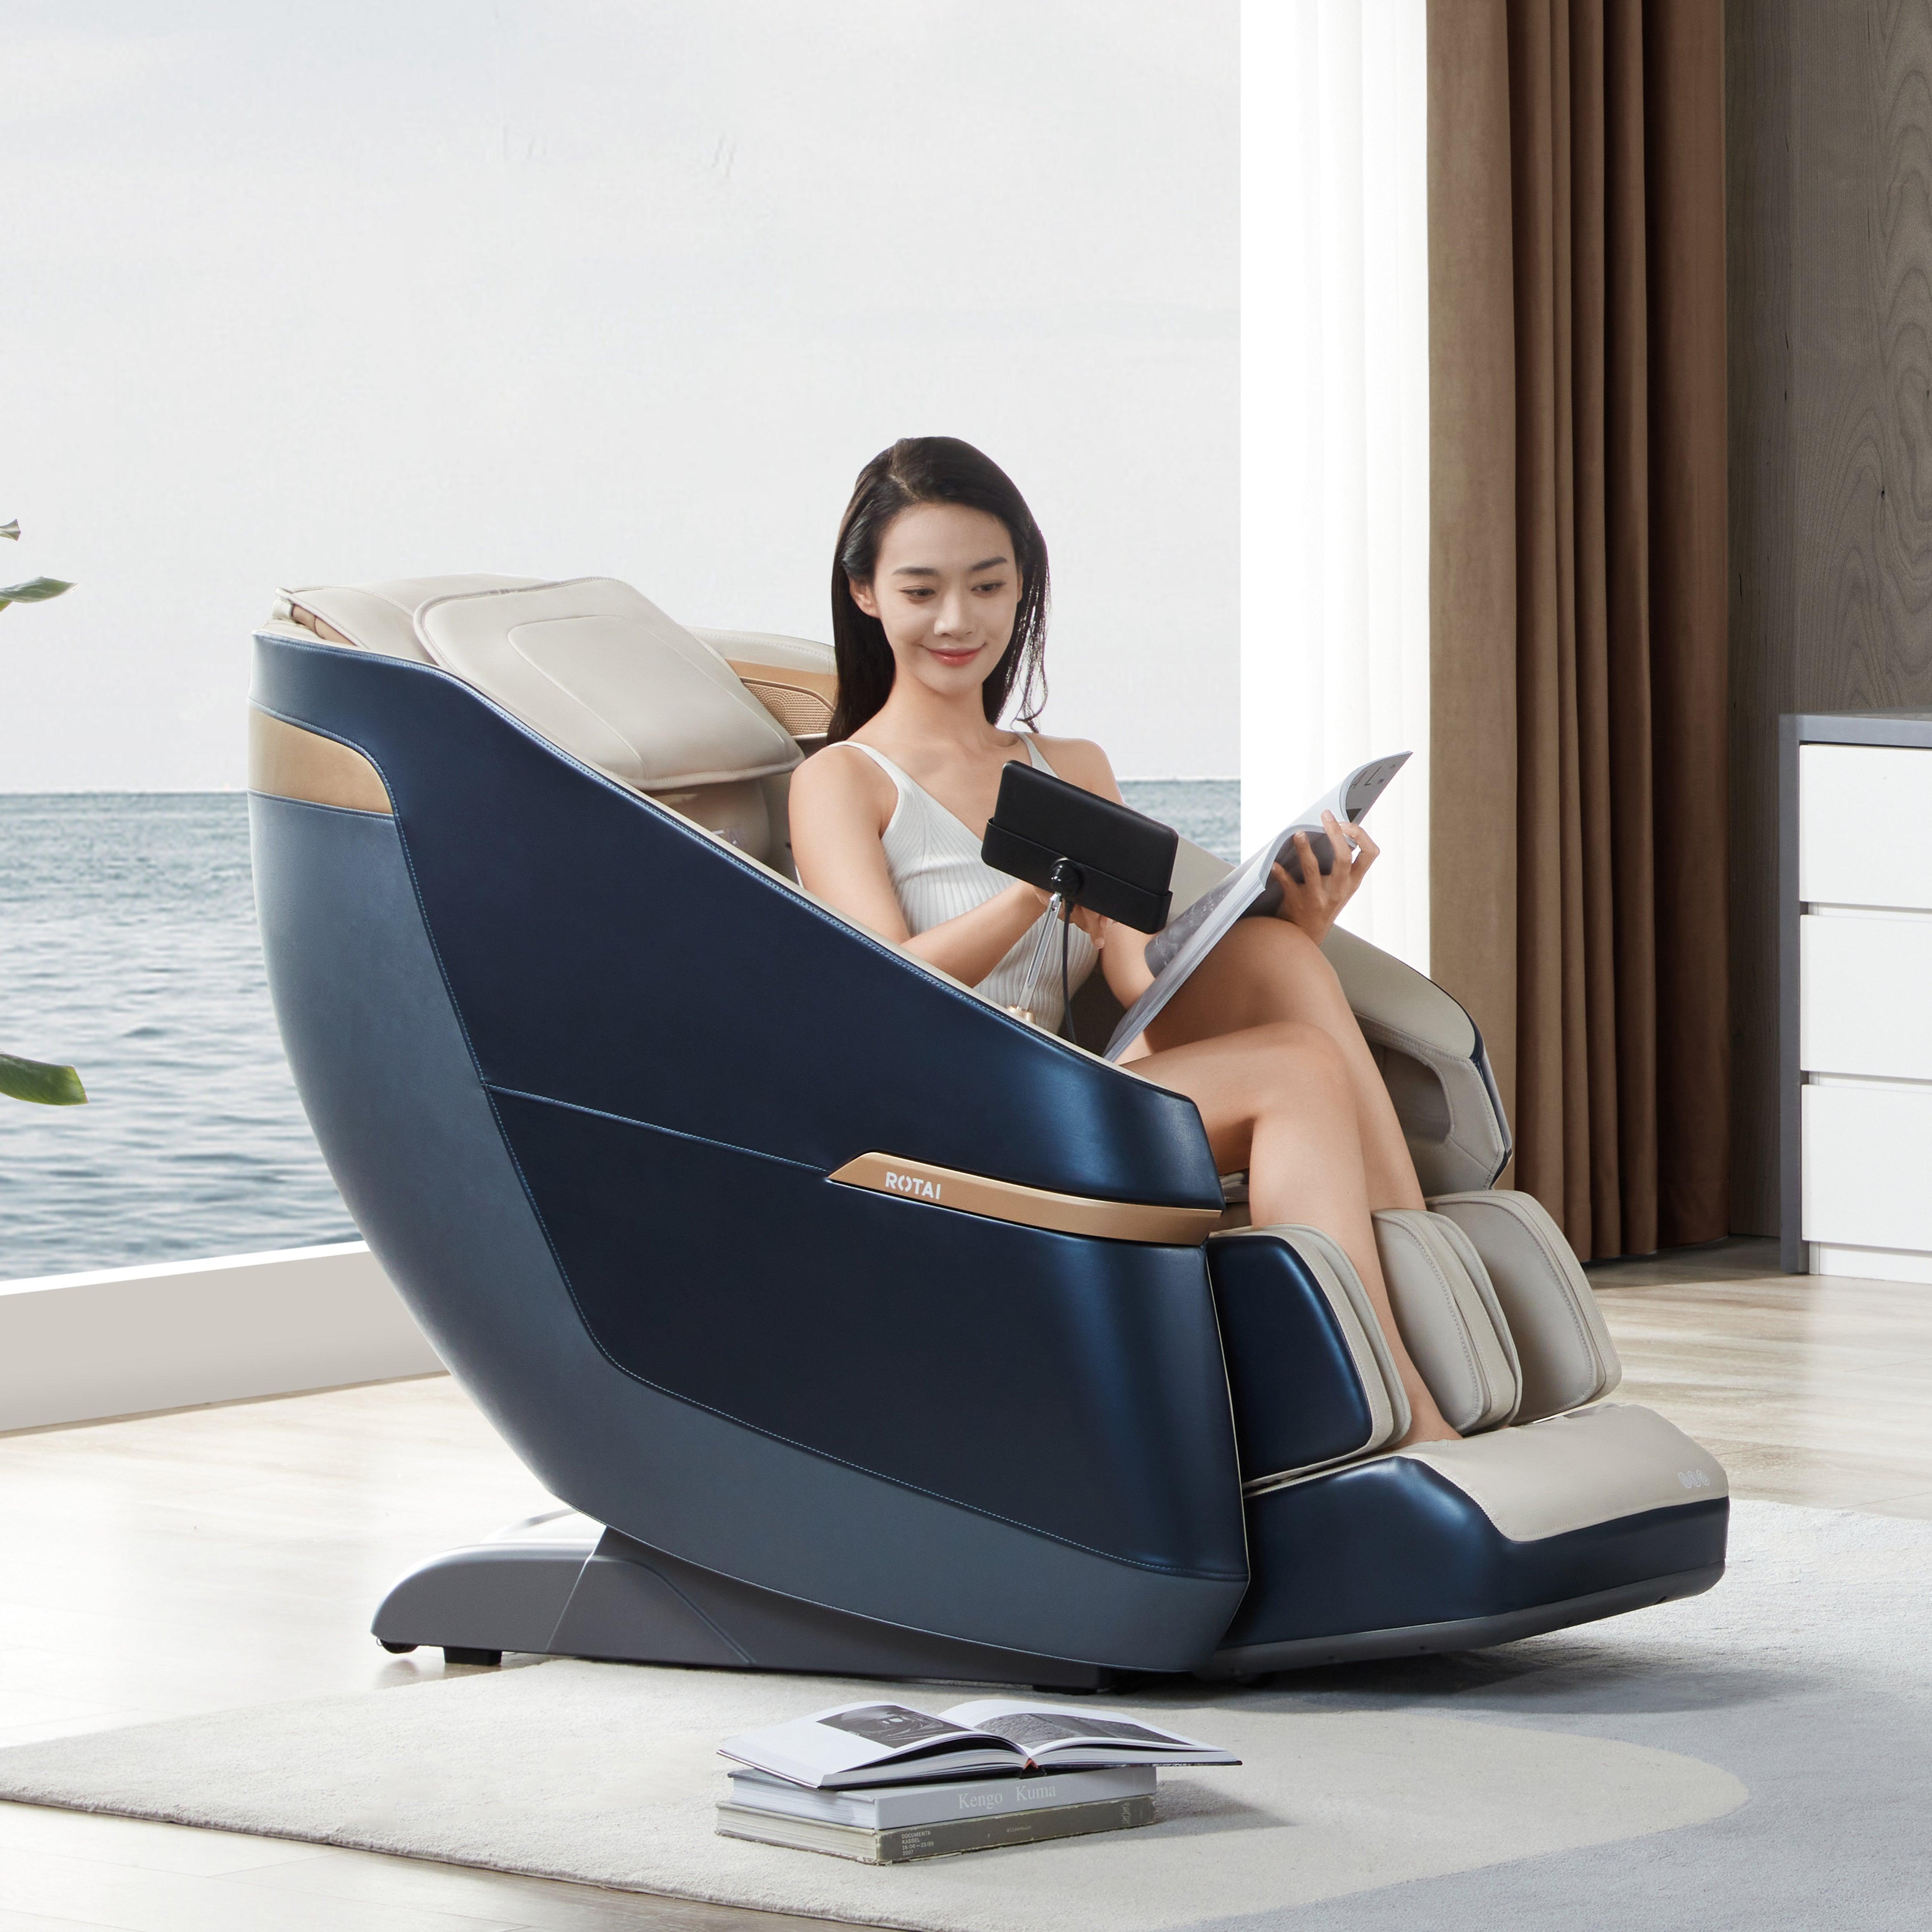 Woman enjoying relaxation in Jimny blue massage chair with 1-Press Start Rocking feature, best massage chair in UAE, Dubai massage chair shop.